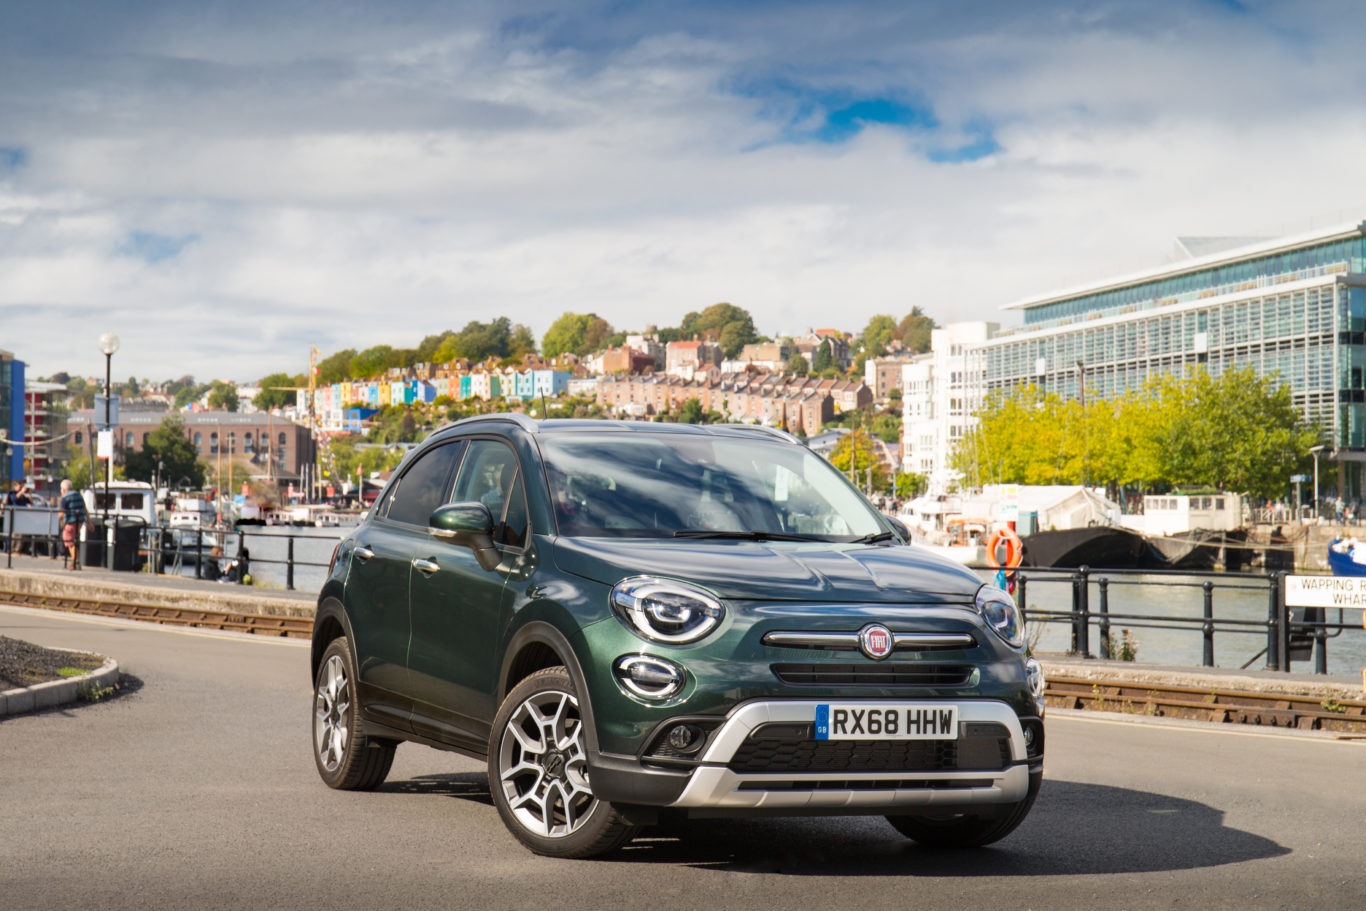 A new-look front end freshens up the look of the 500X